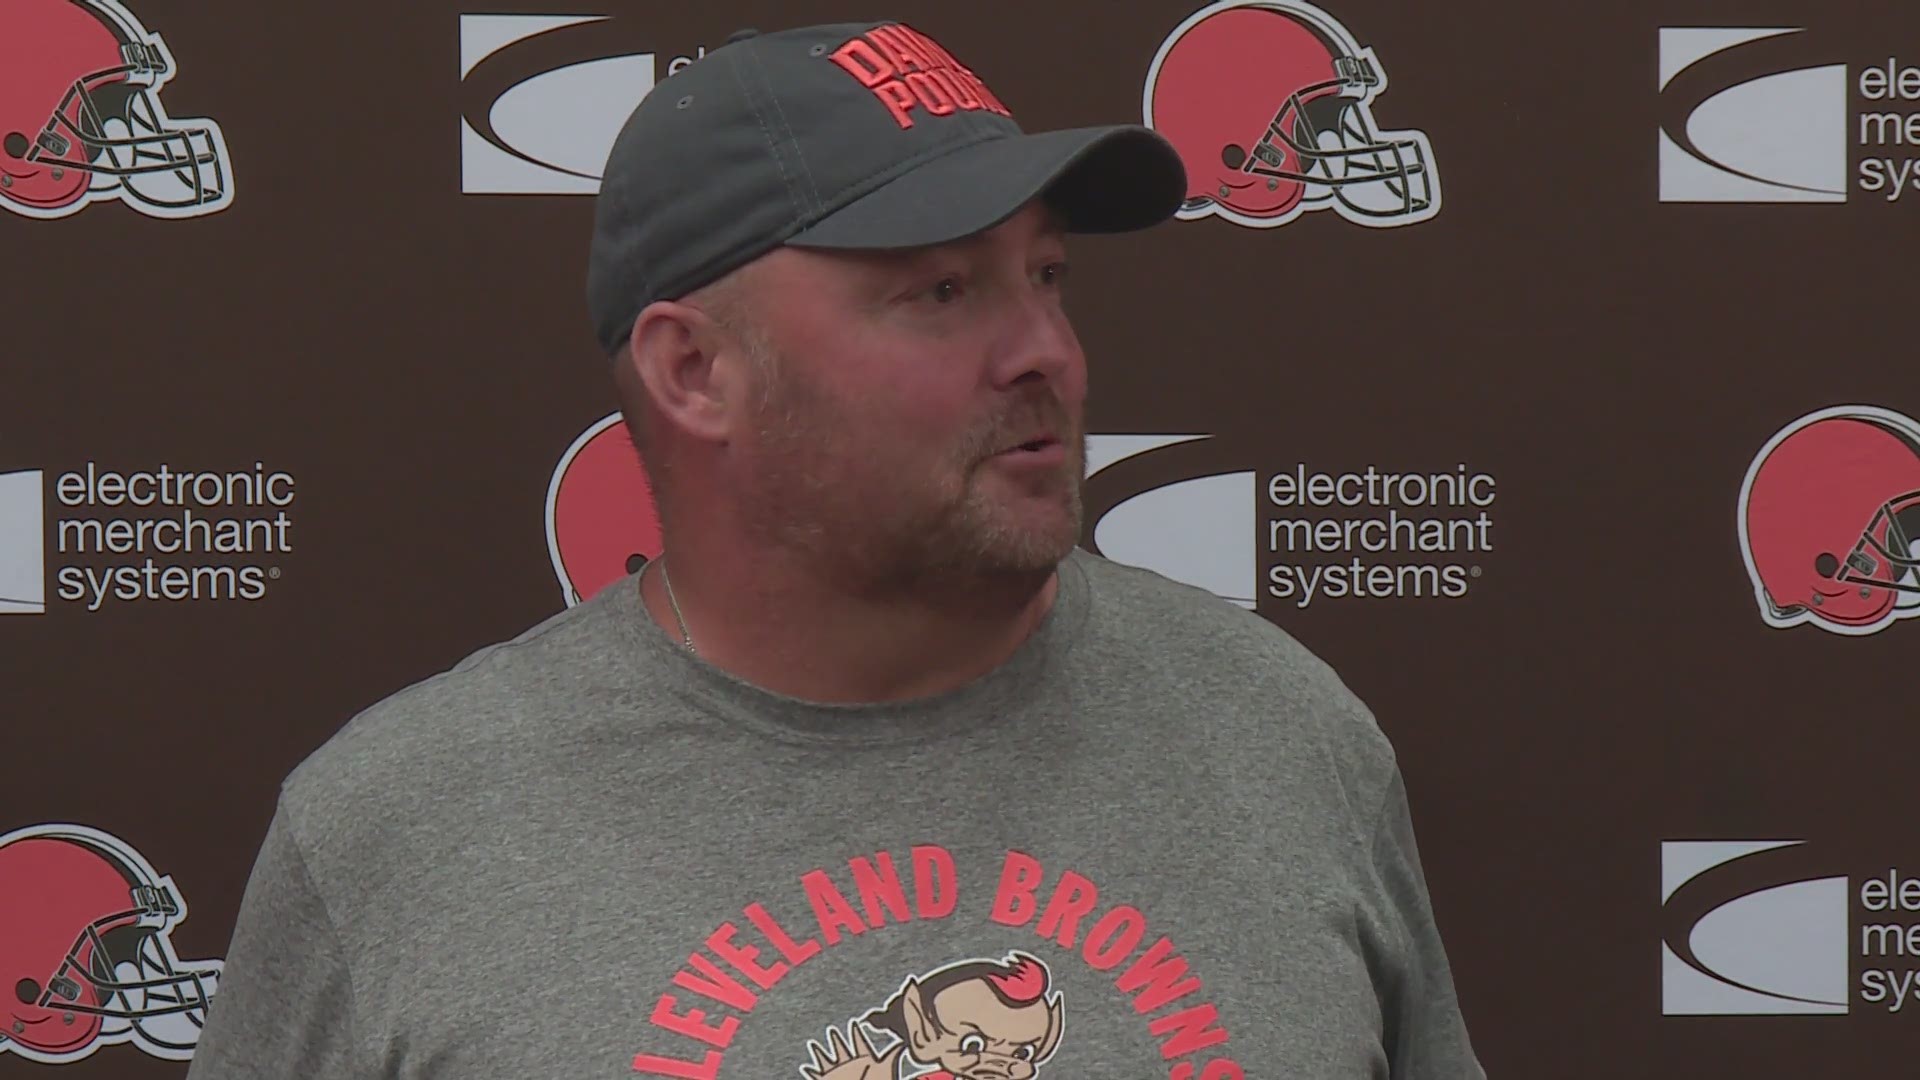 Cleveland Browns head coach Freddie Kitchens addressed Baker Mayfield's comments on New York Giants rookie quarterback Daniel Jones following Tuesday's practice. In an interview with GQ, Mayfield said he "cannot believe" the Giants selected Jones with the sixth pick of the NFL draft.